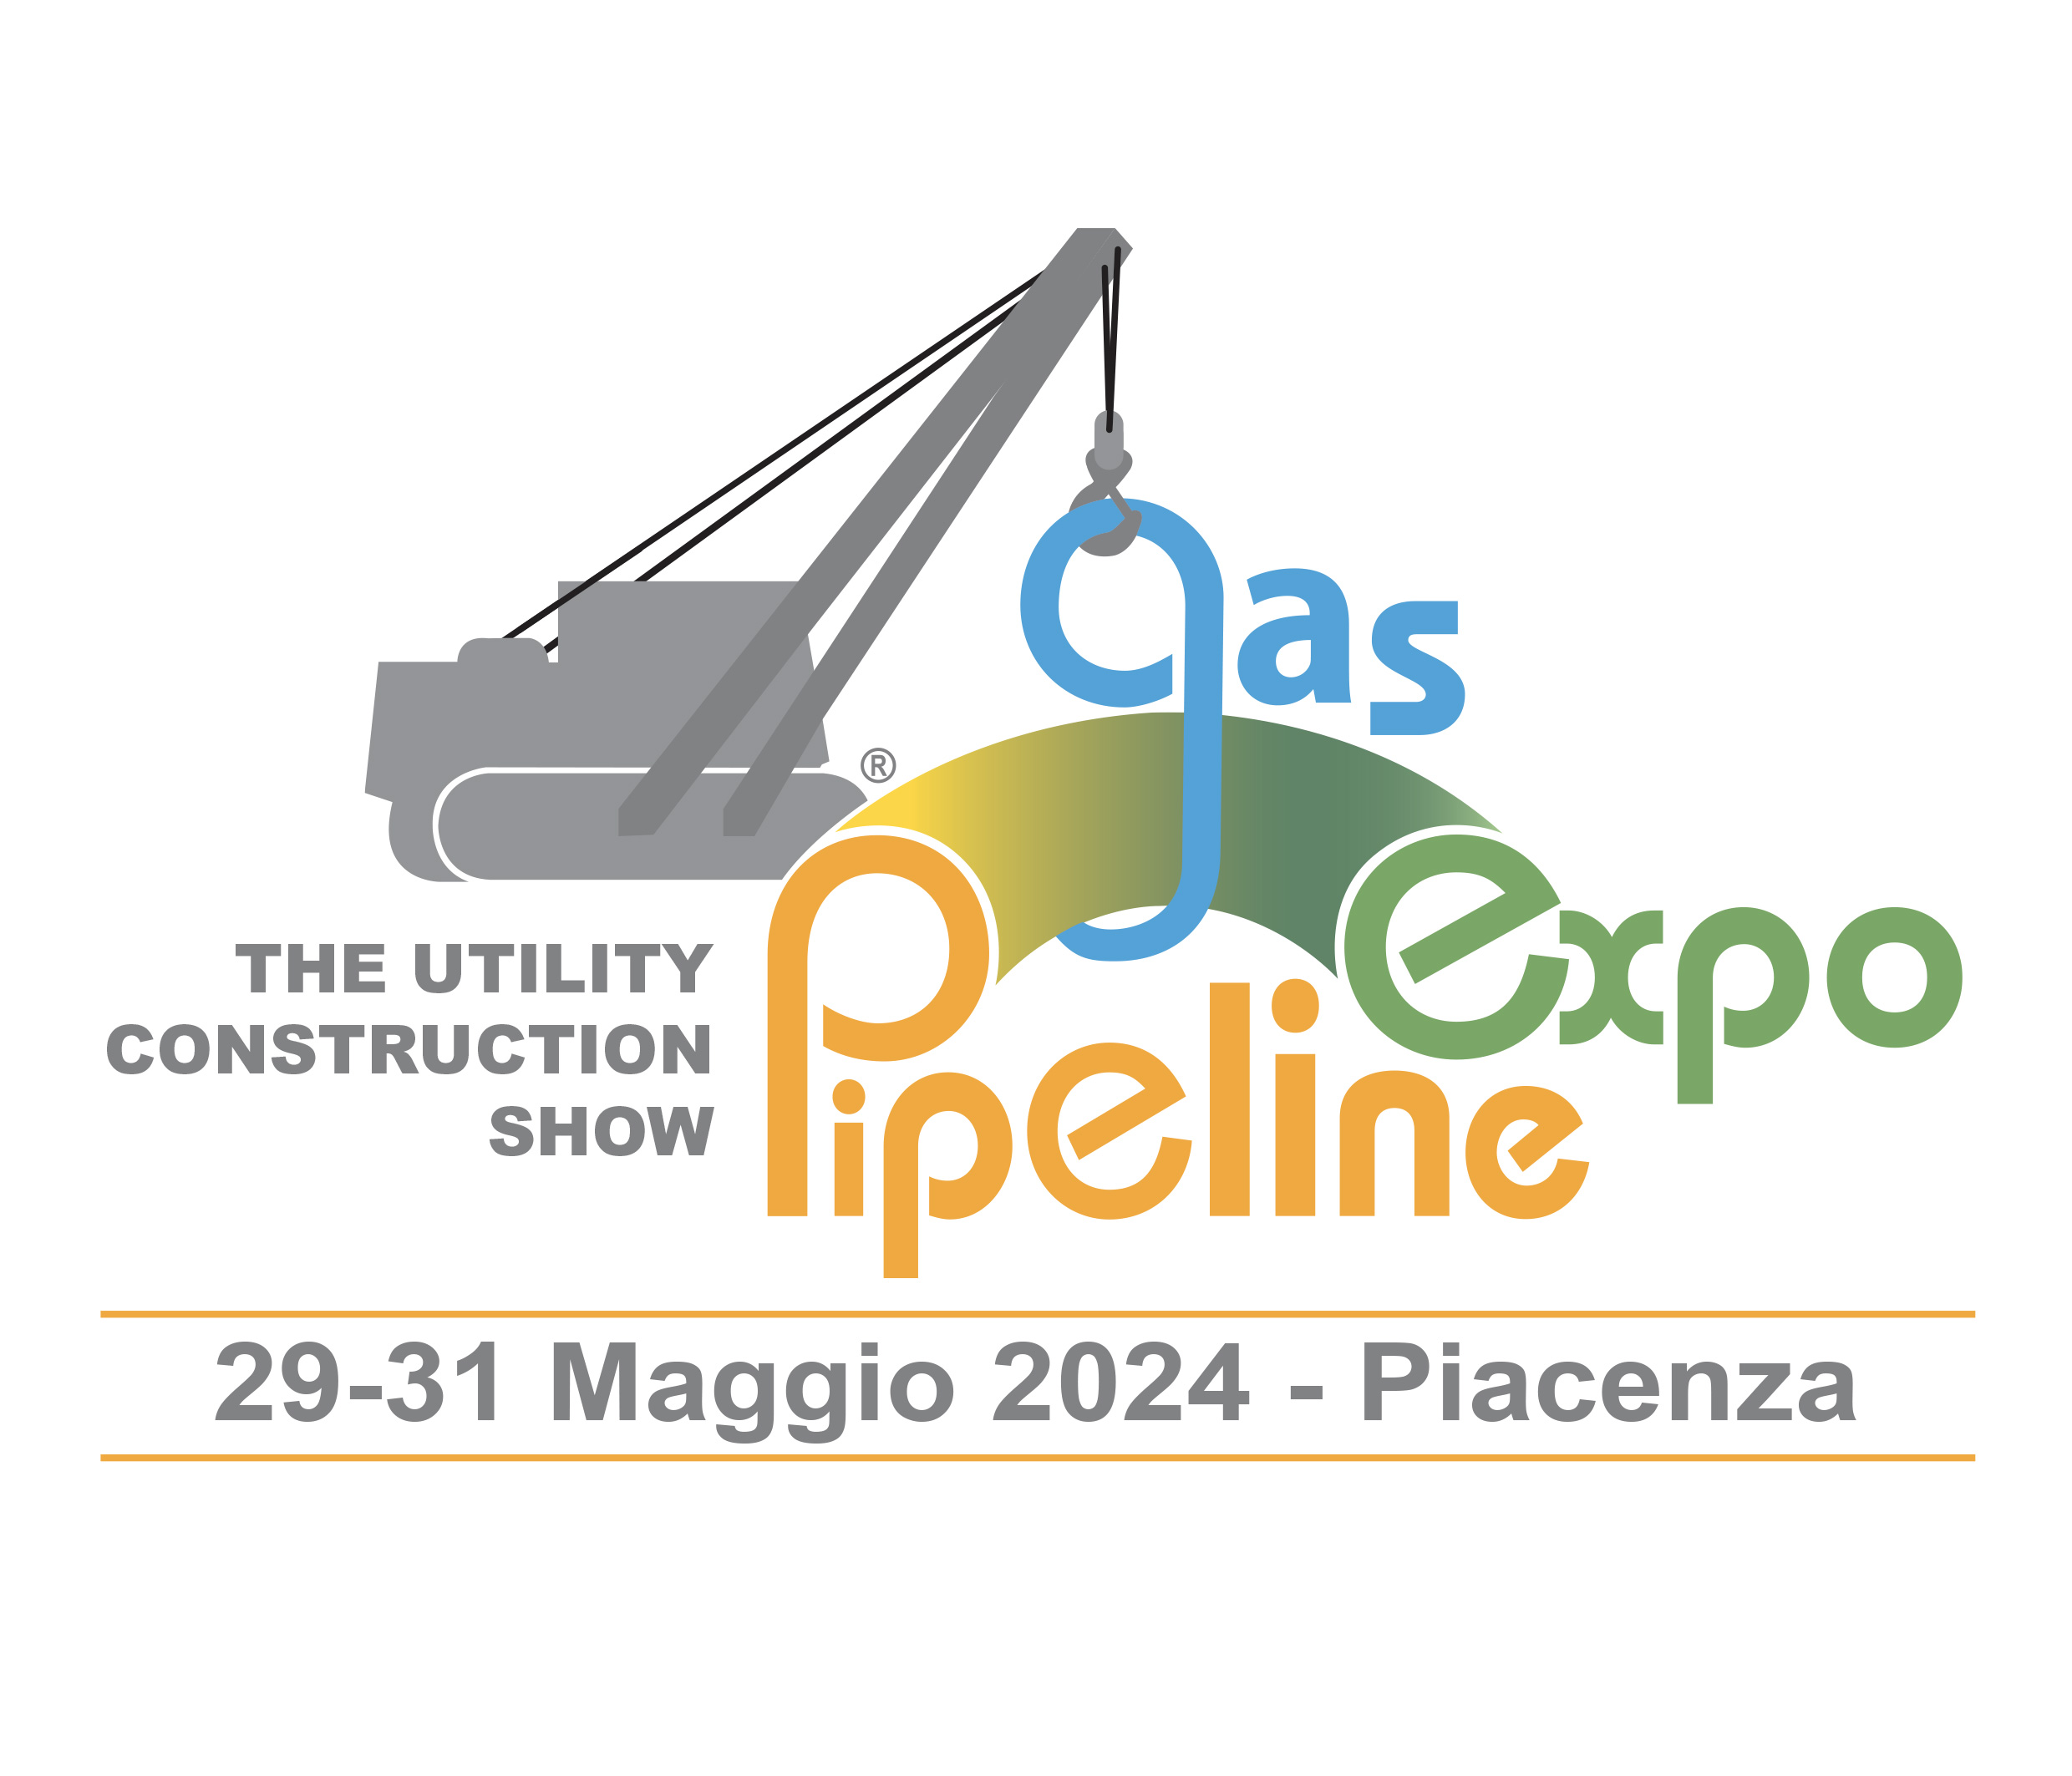 PIPELINE & GAS EXPO/THE UTILITY CONSTRUCTION SHOW